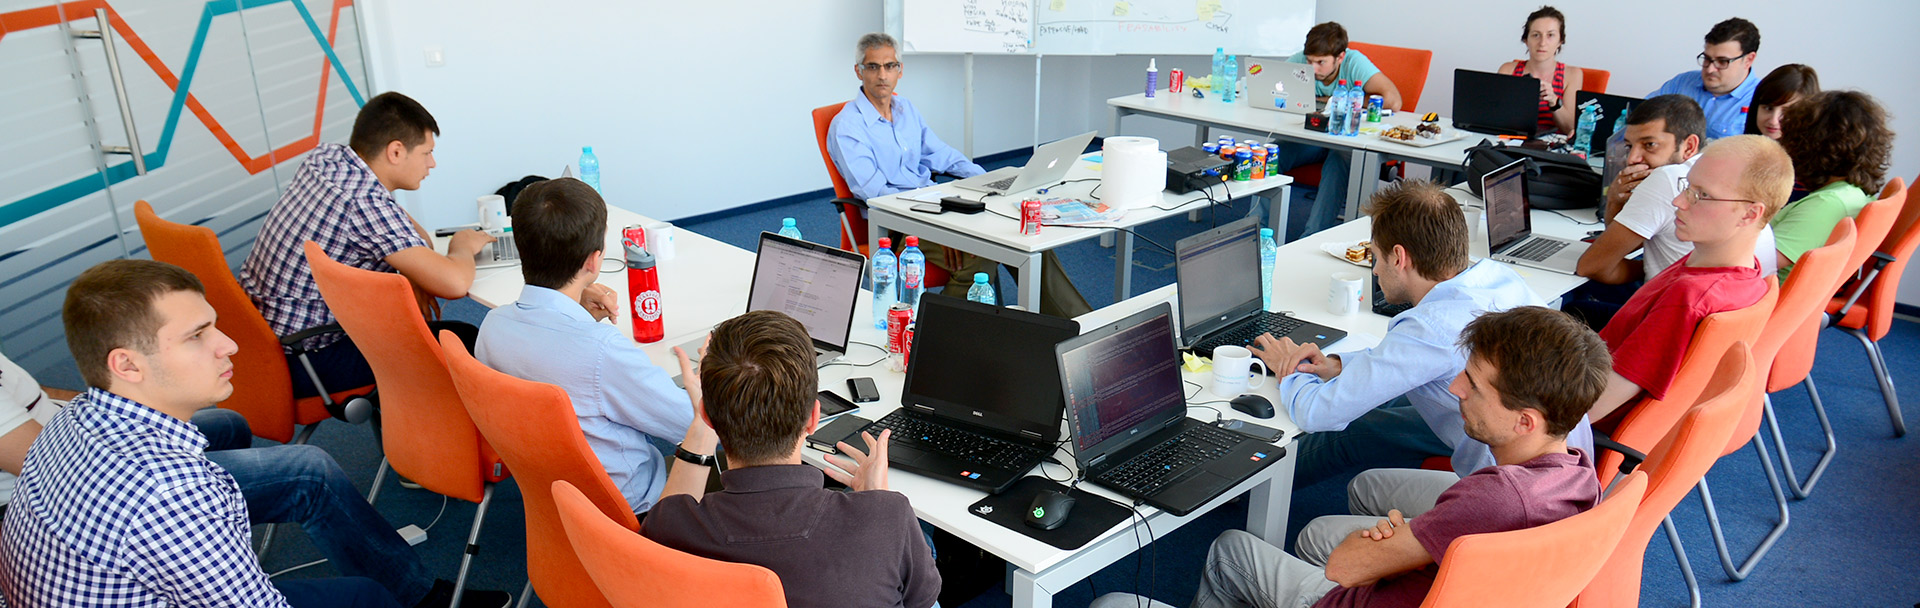 What we learned from a hackathon with IBM’s Bluemix